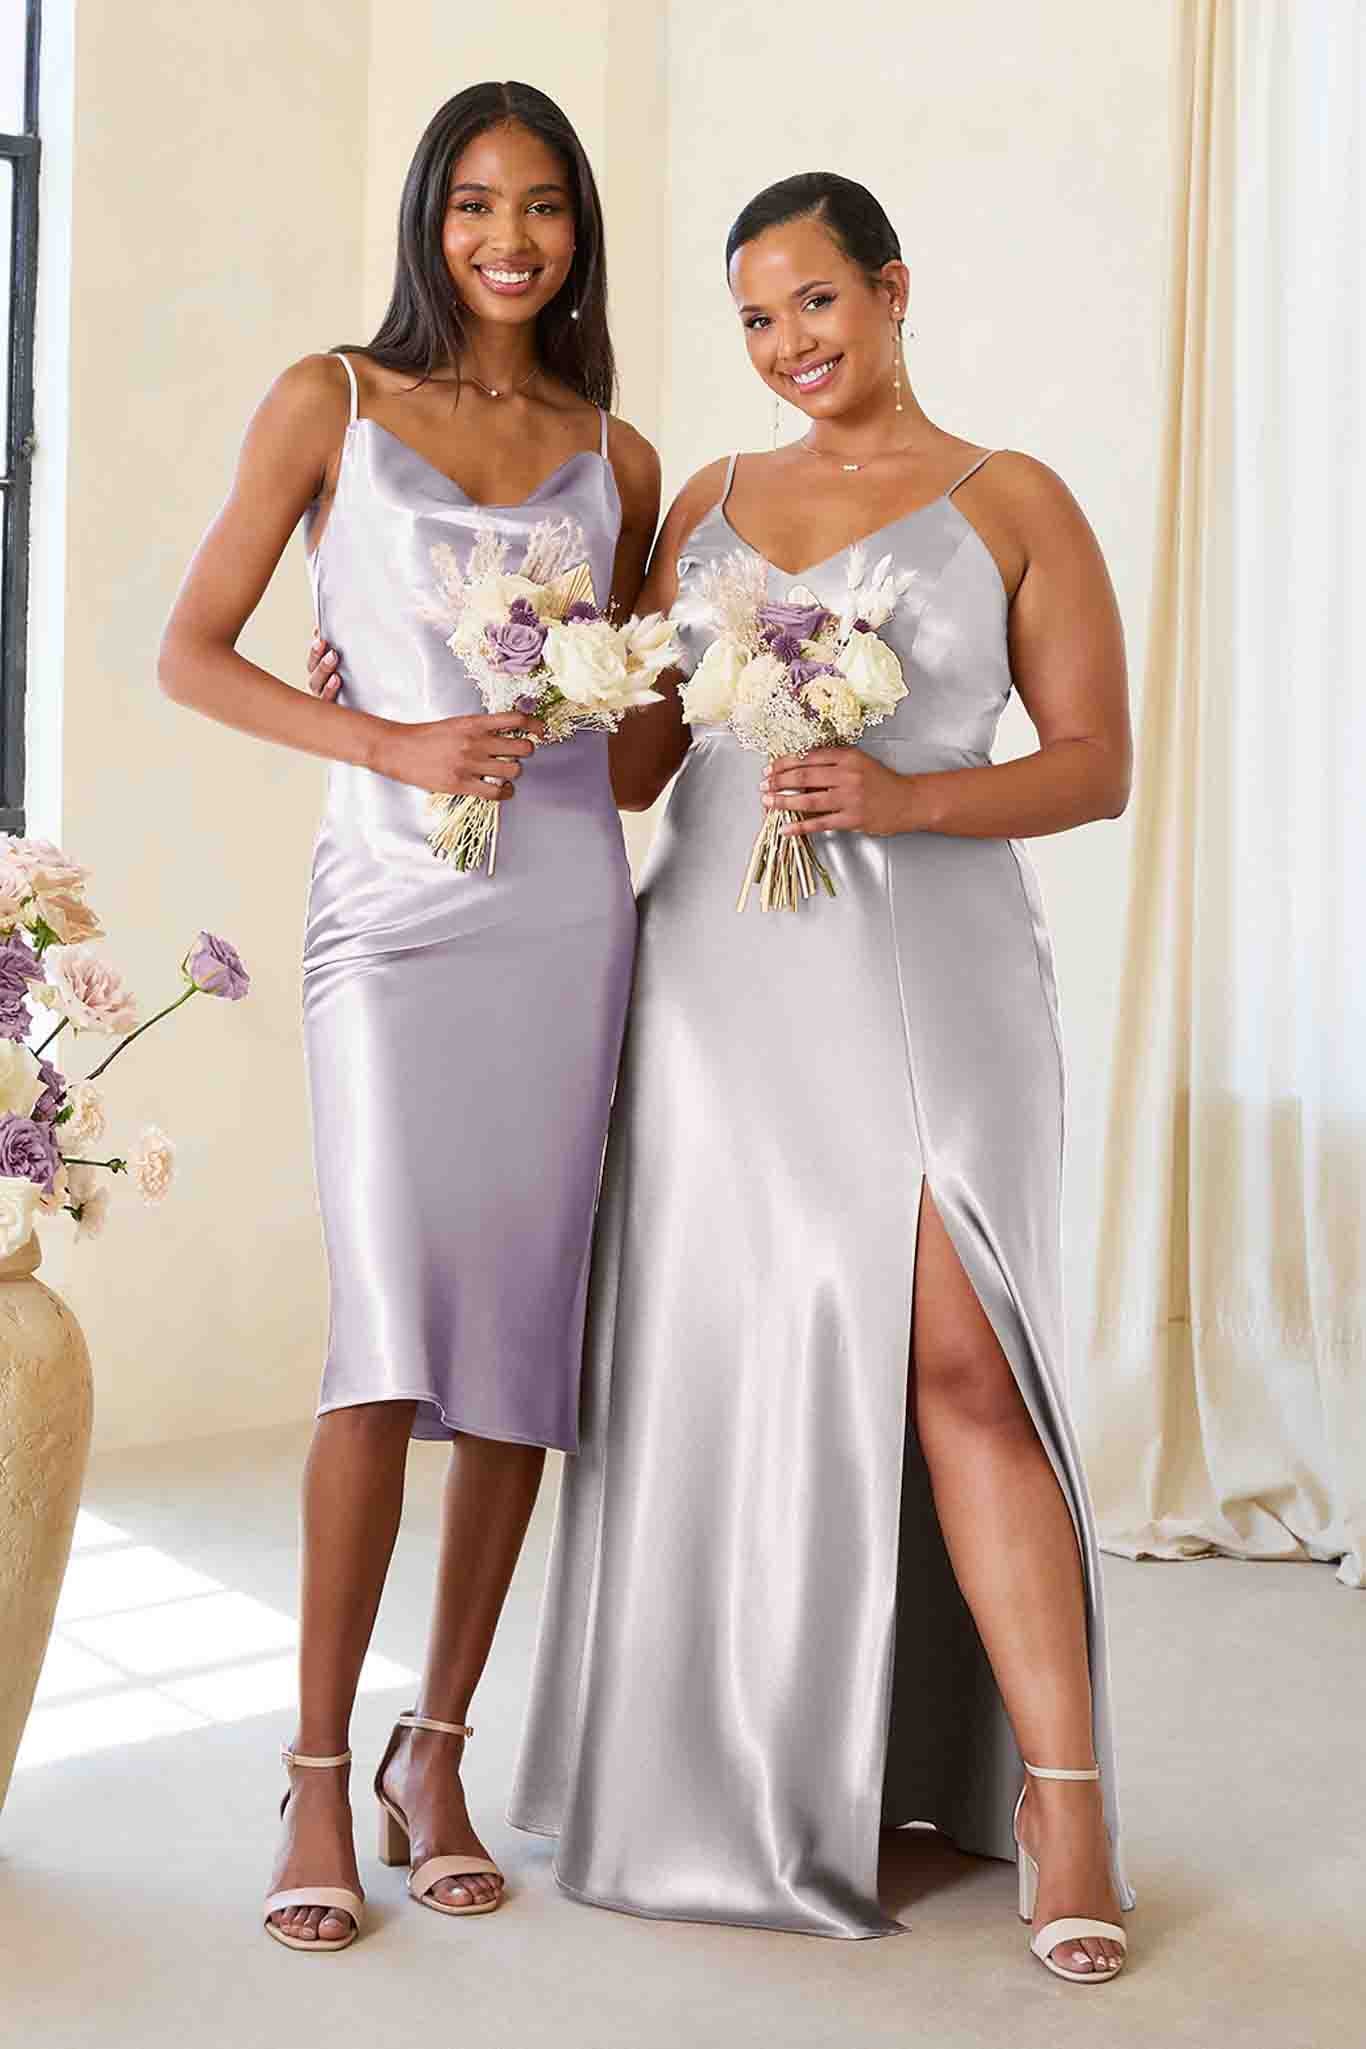 lilac dress for women